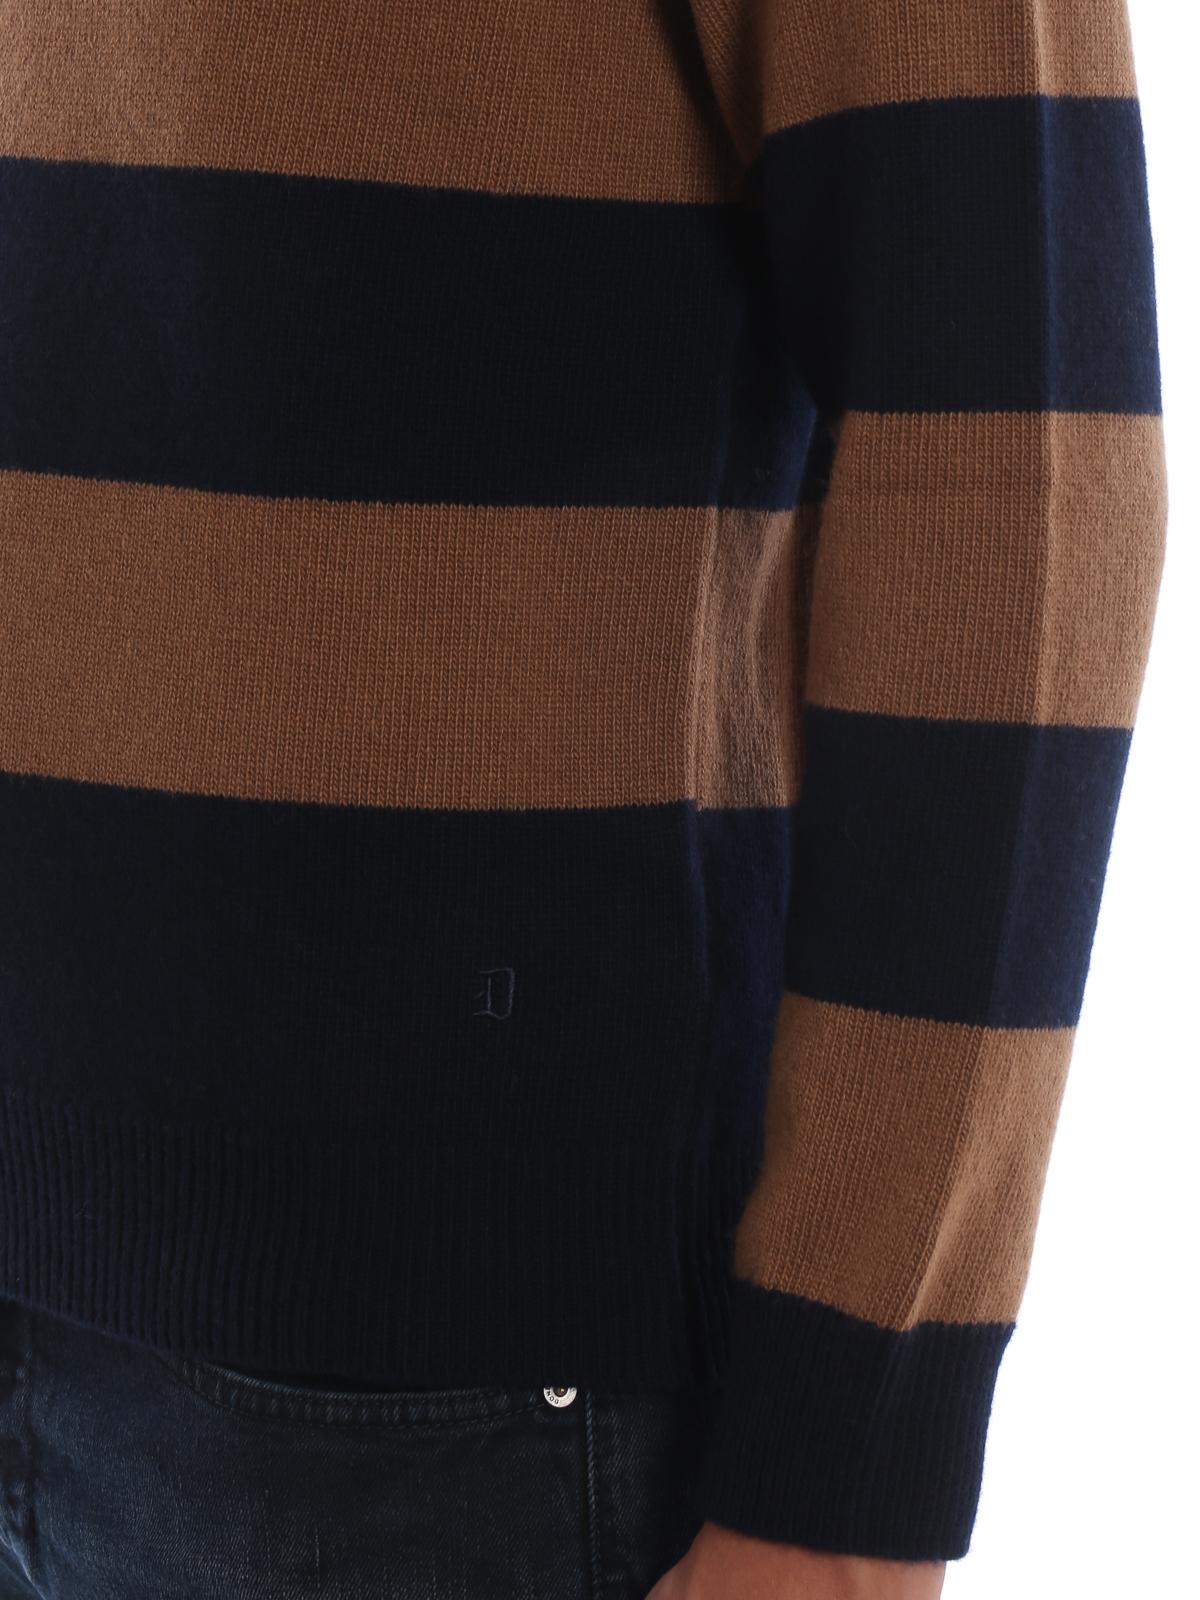 Dondup Timeless And Graphic Striped Wool Crewneck in Brown for Men - Lyst